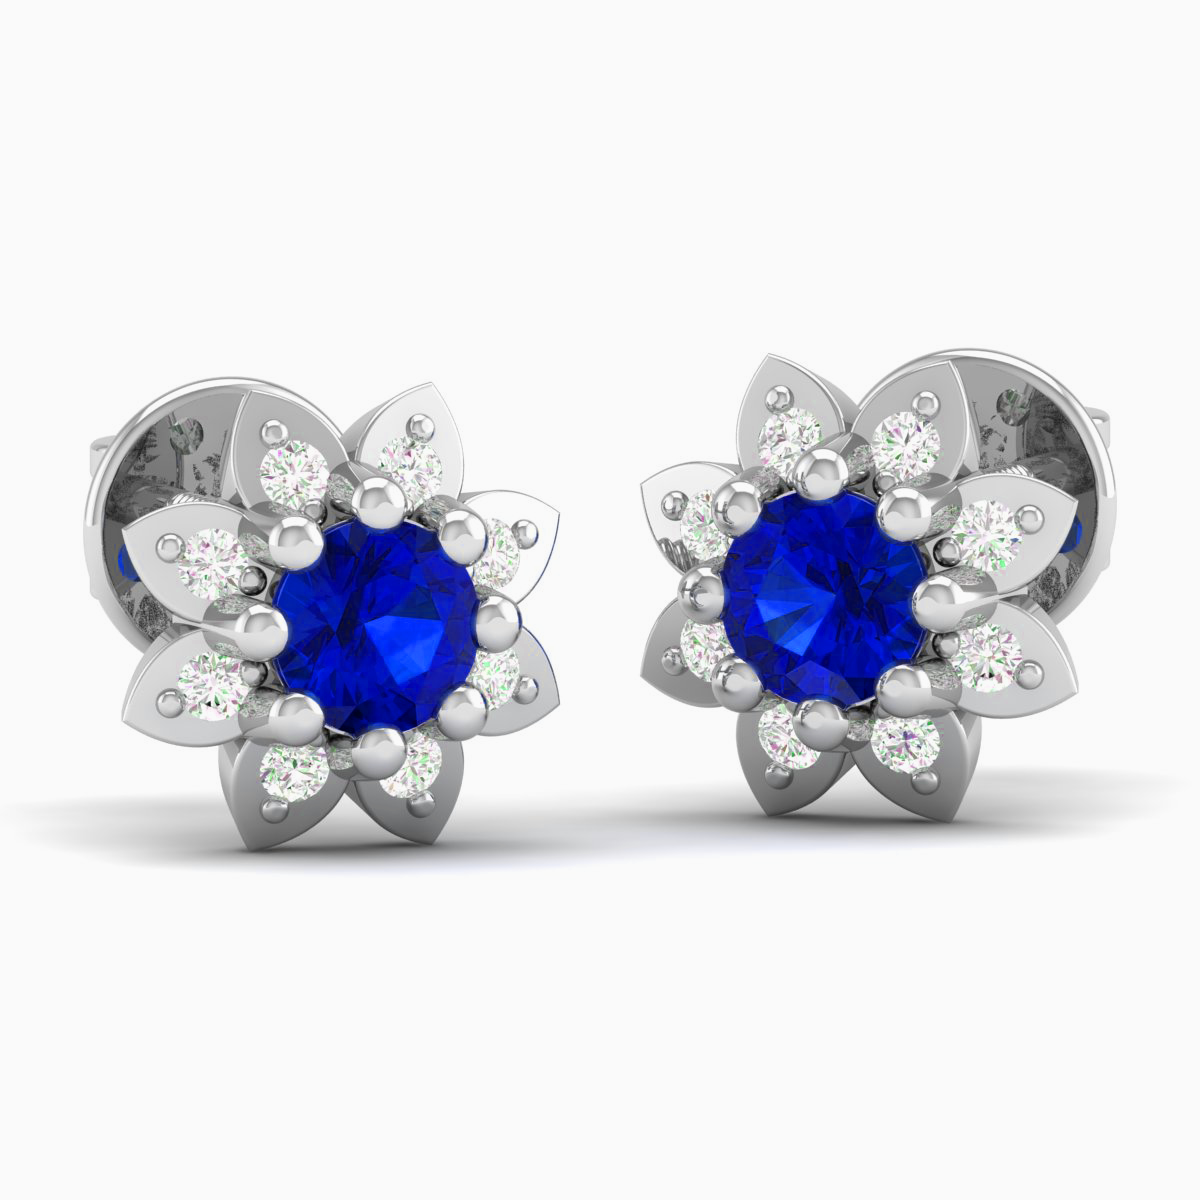 Akshat Sapphire Sterling Silver (92.5% purity) Precious Stud Earrings for Girls and Women Pure Silver Beautiful and Designer studs earring with cubic zirconia (AD) stones (9.22mm × 9.22mm)